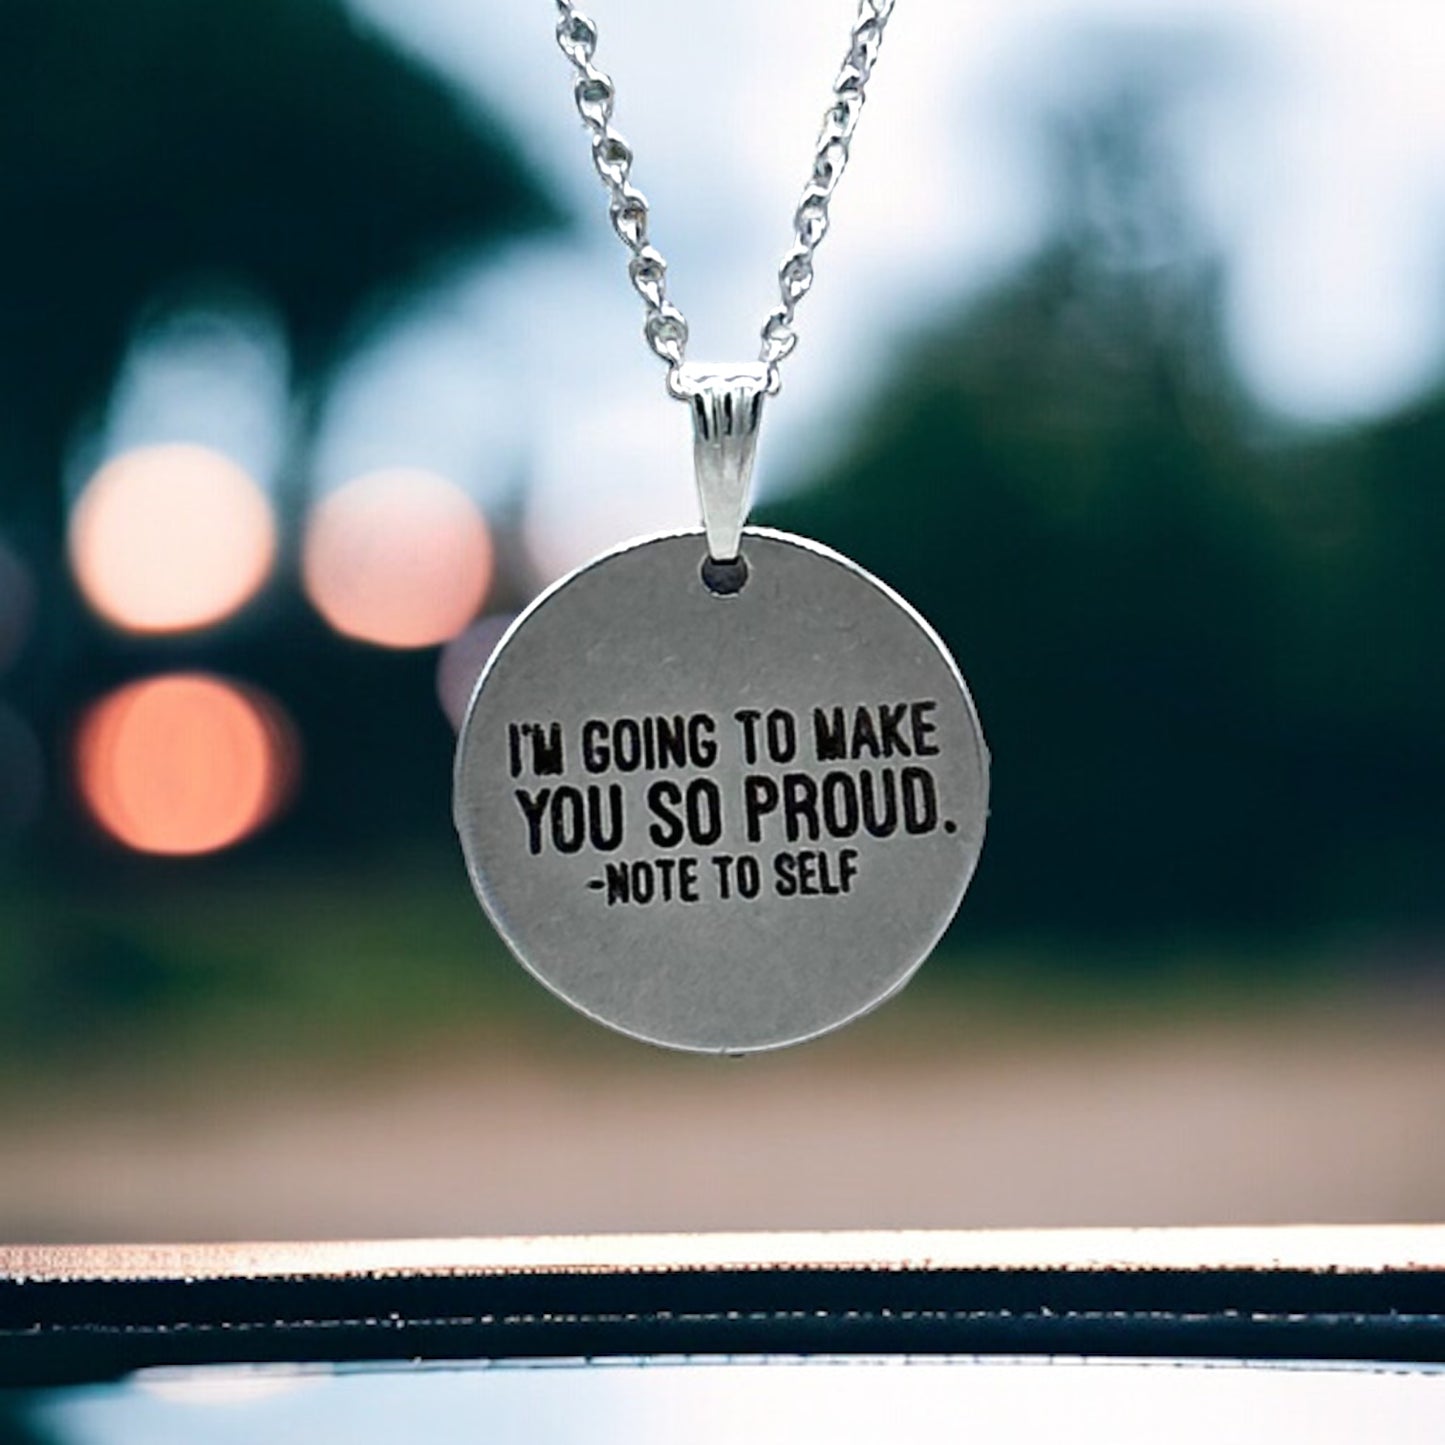 Silver Charm Necklace - I’m going to make you so proud